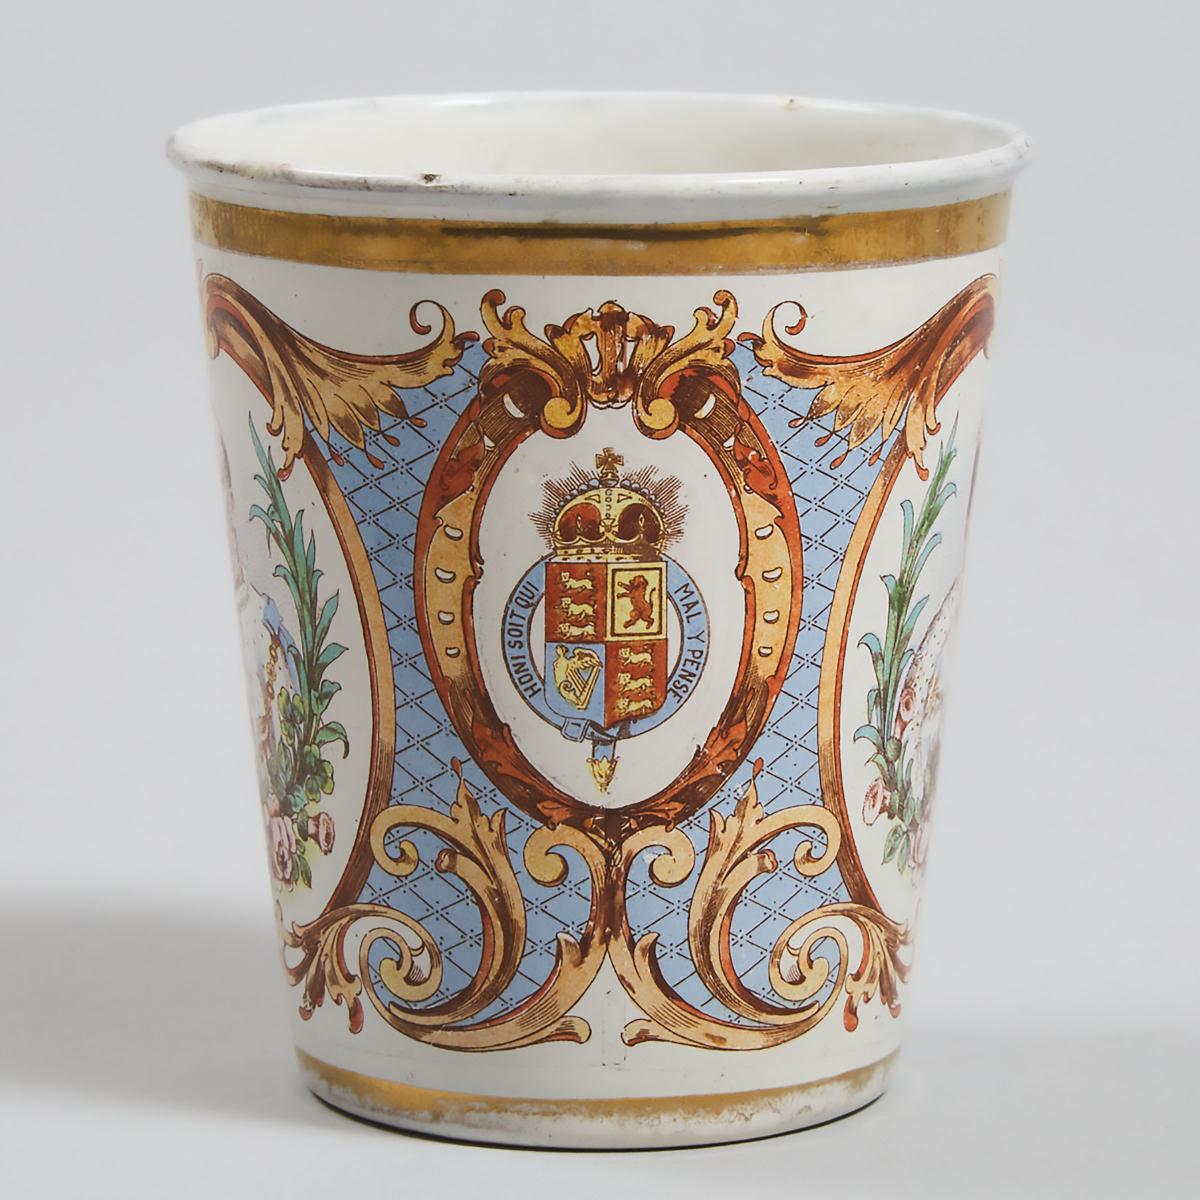 English Enamelled Copper Cup Commemorating the Coronation of Edward VII, 1902, height 0.4 in — 1 cm - Image 4 of 5